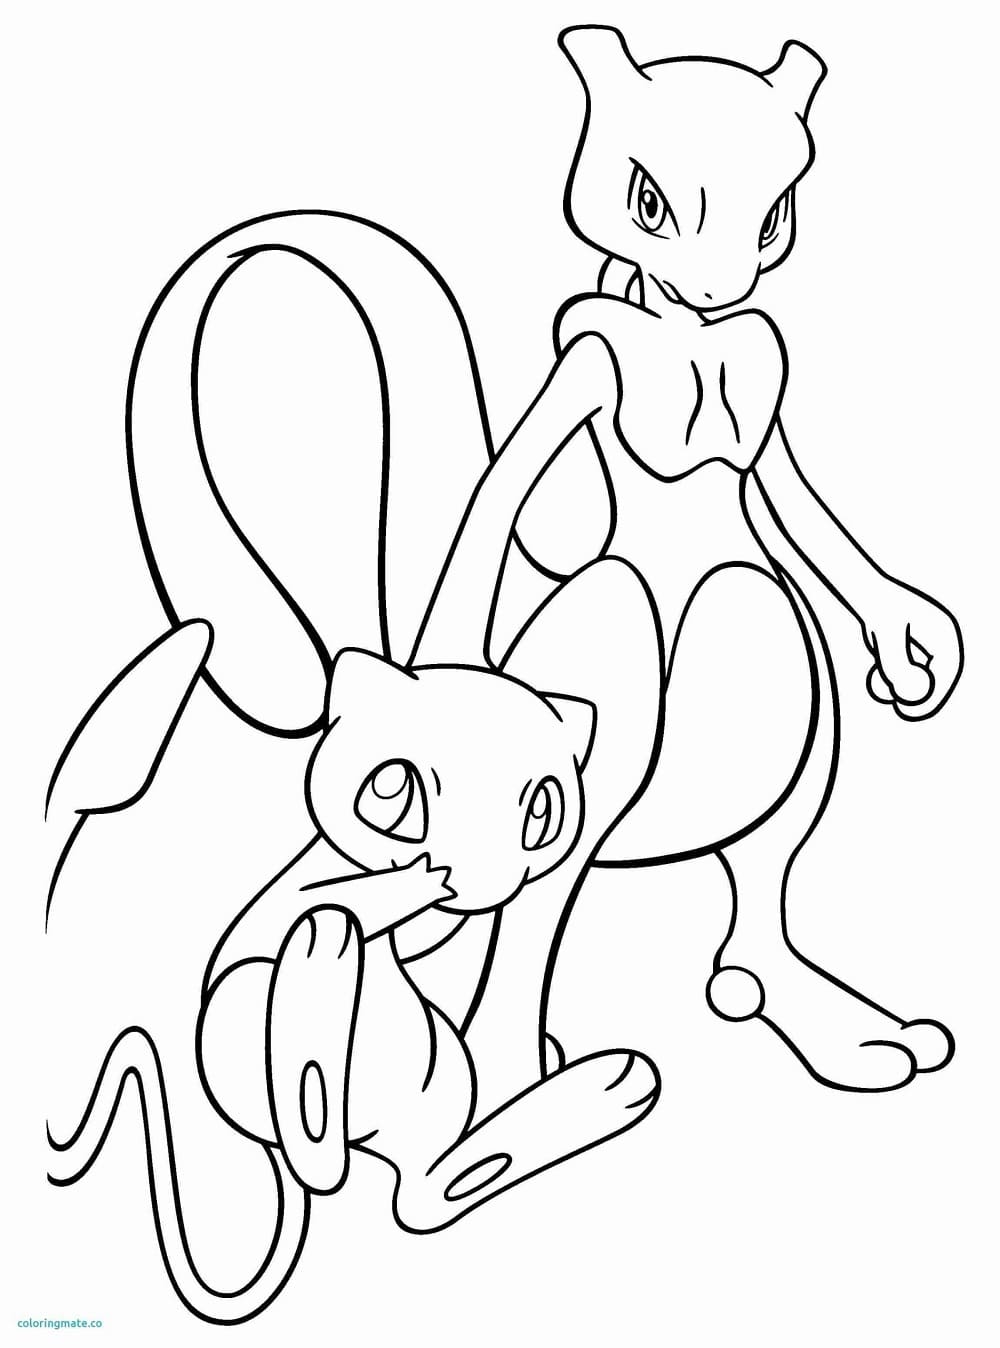 Printable Mewtwo Image Coloring Page